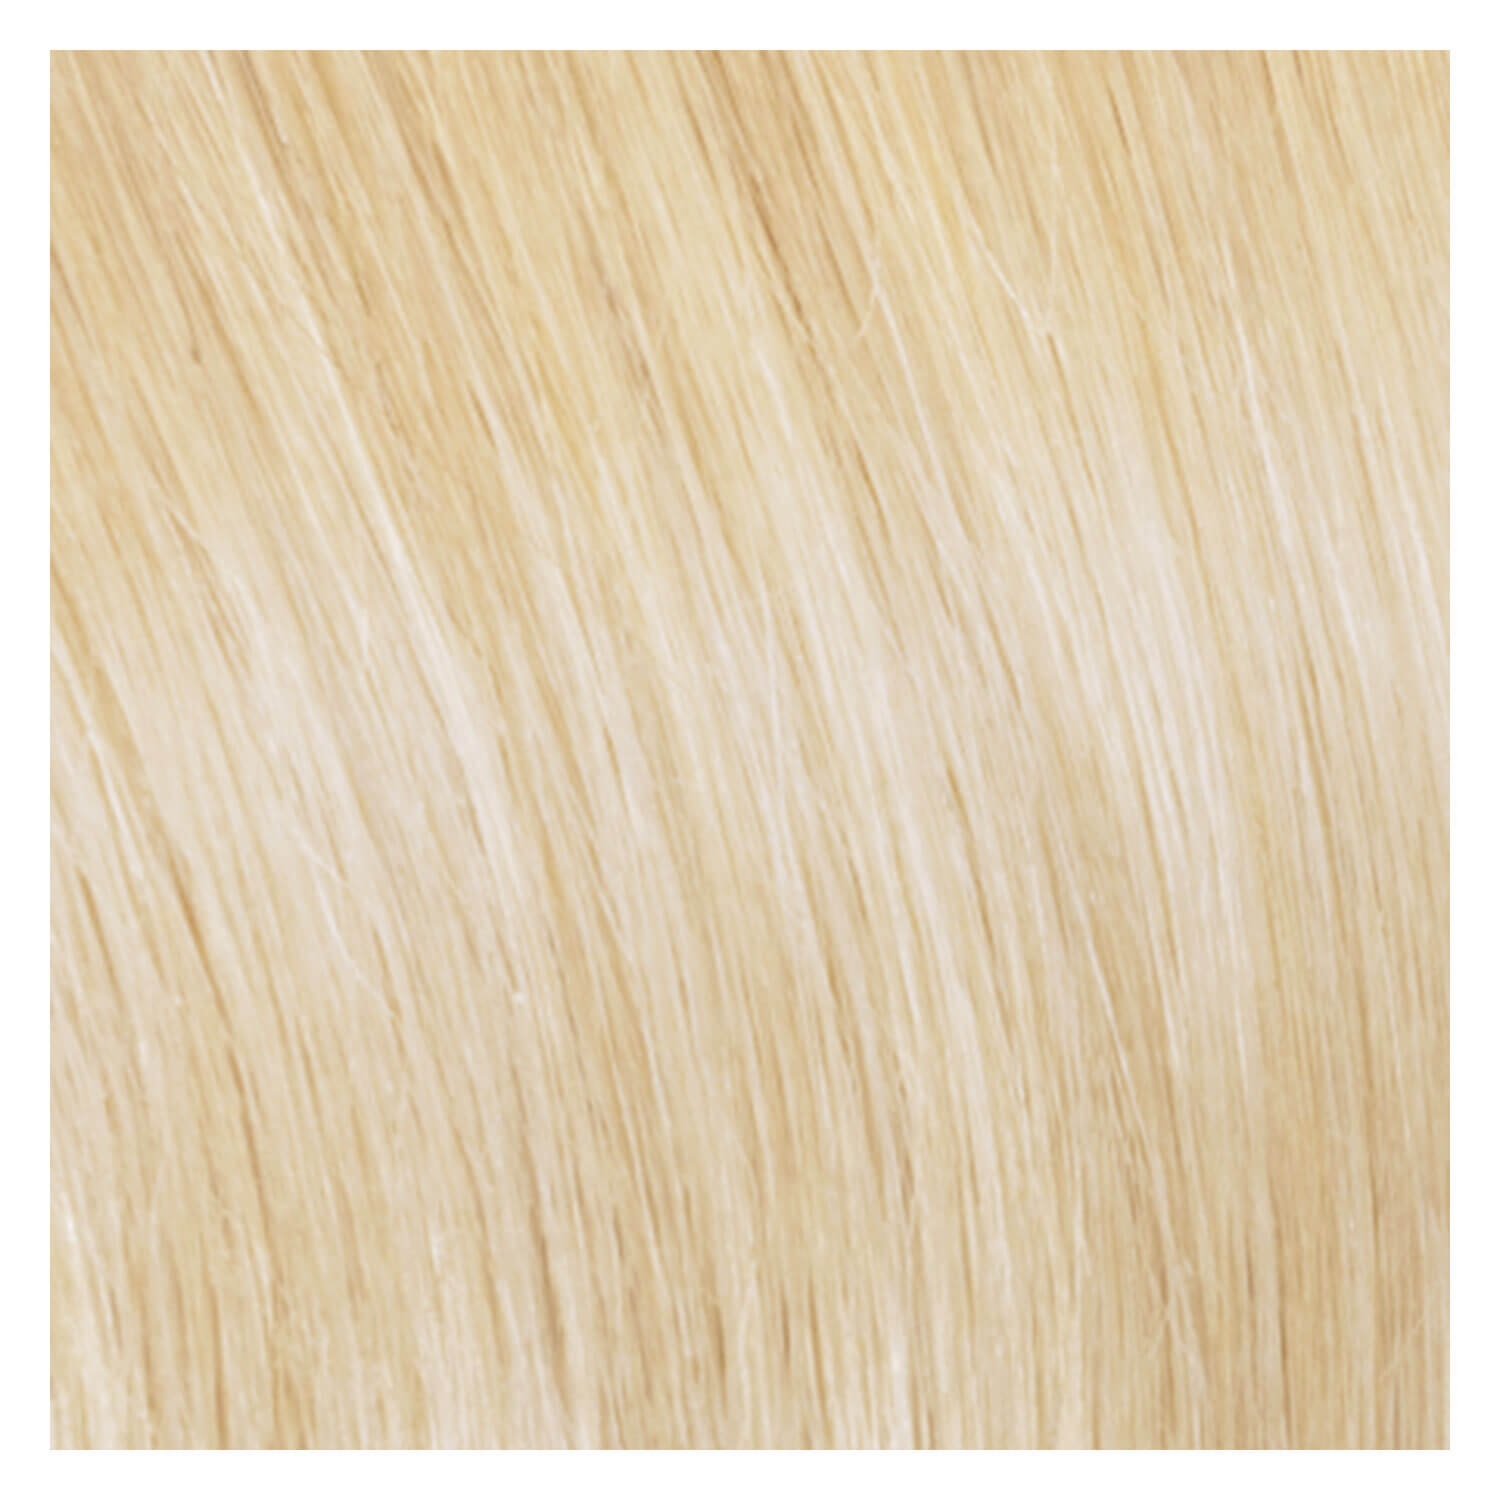 Product image from SHE Flip In-System Hair Extensions - 1001 Sehr helles Platinblond 50/55cm